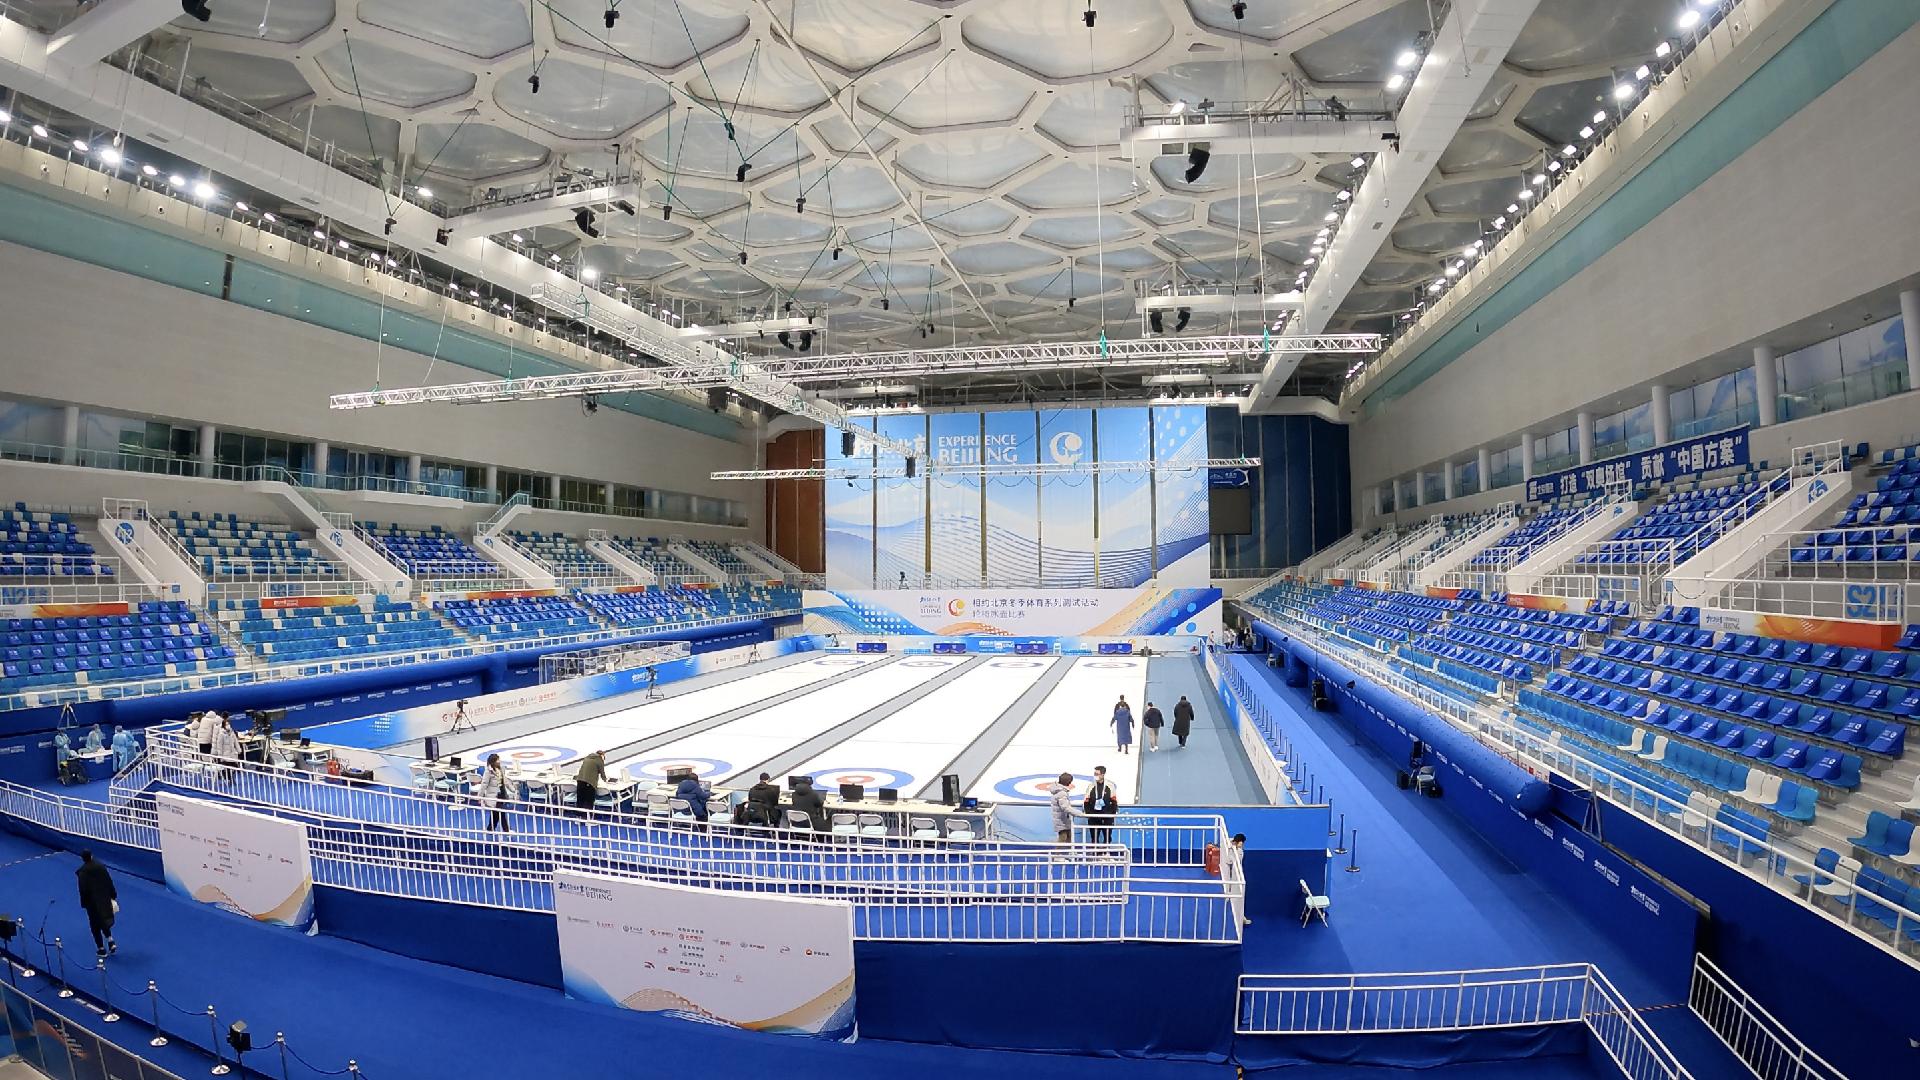 2022 Winter Olympic curling tests underway in Beijing's 'Ice Cube' - CGTN